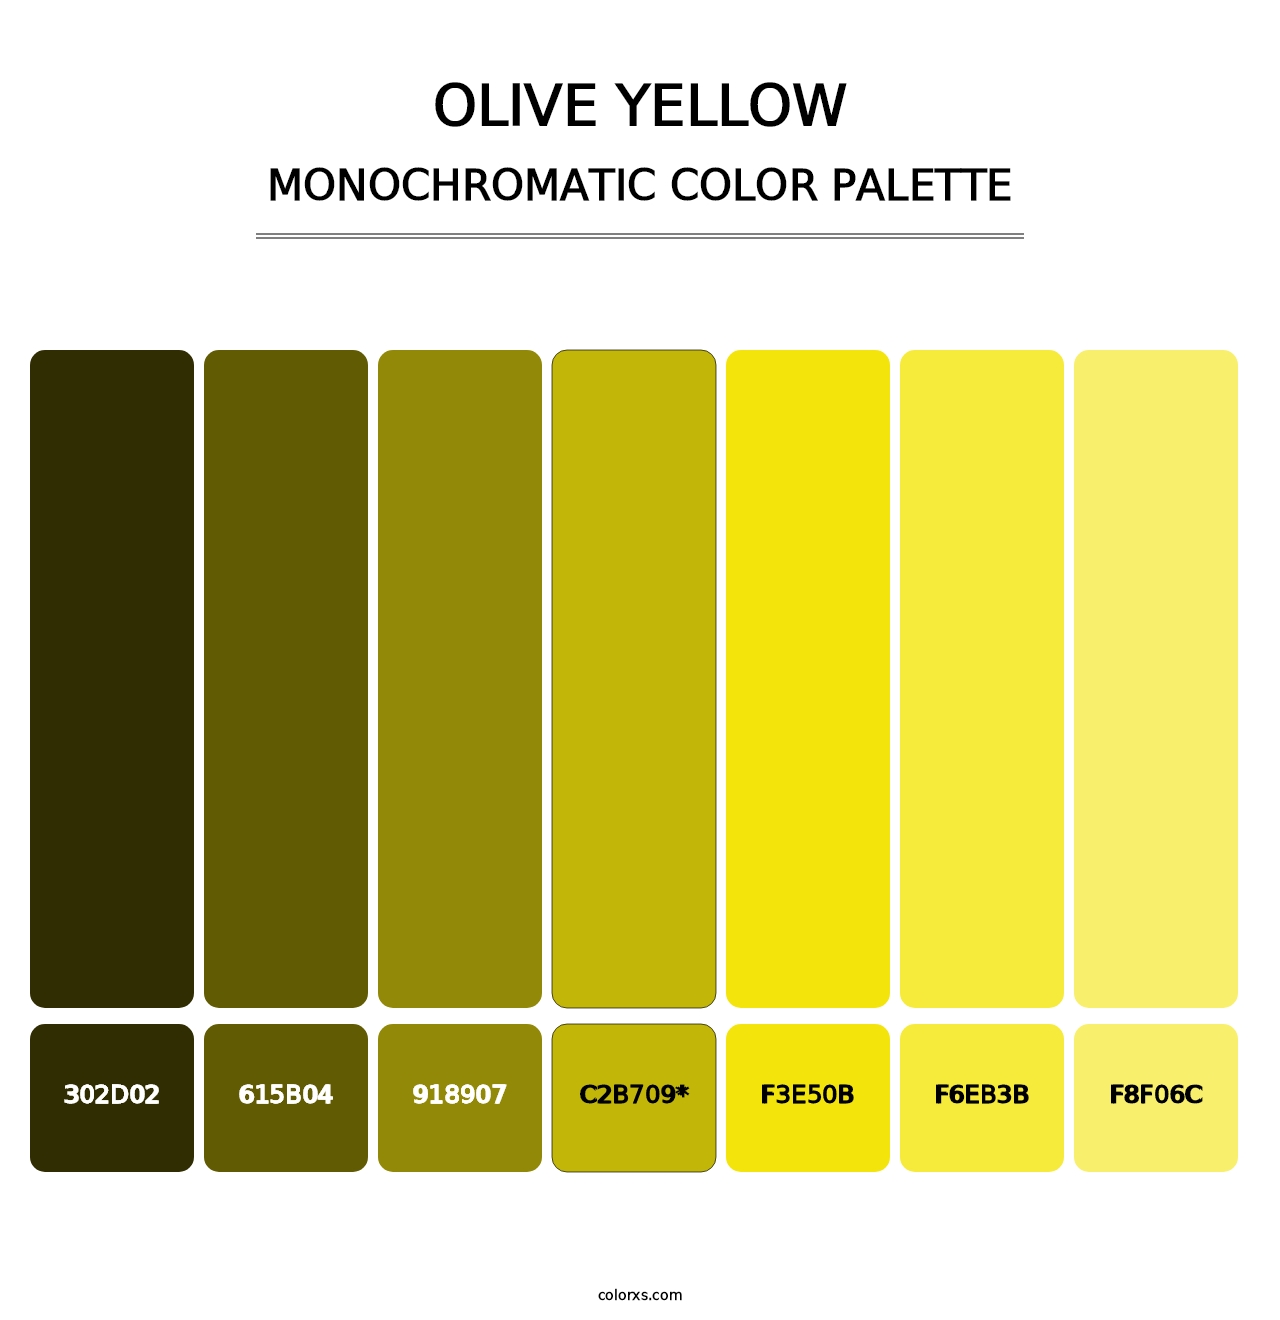 Olive Yellow - Monochromatic Color Palette